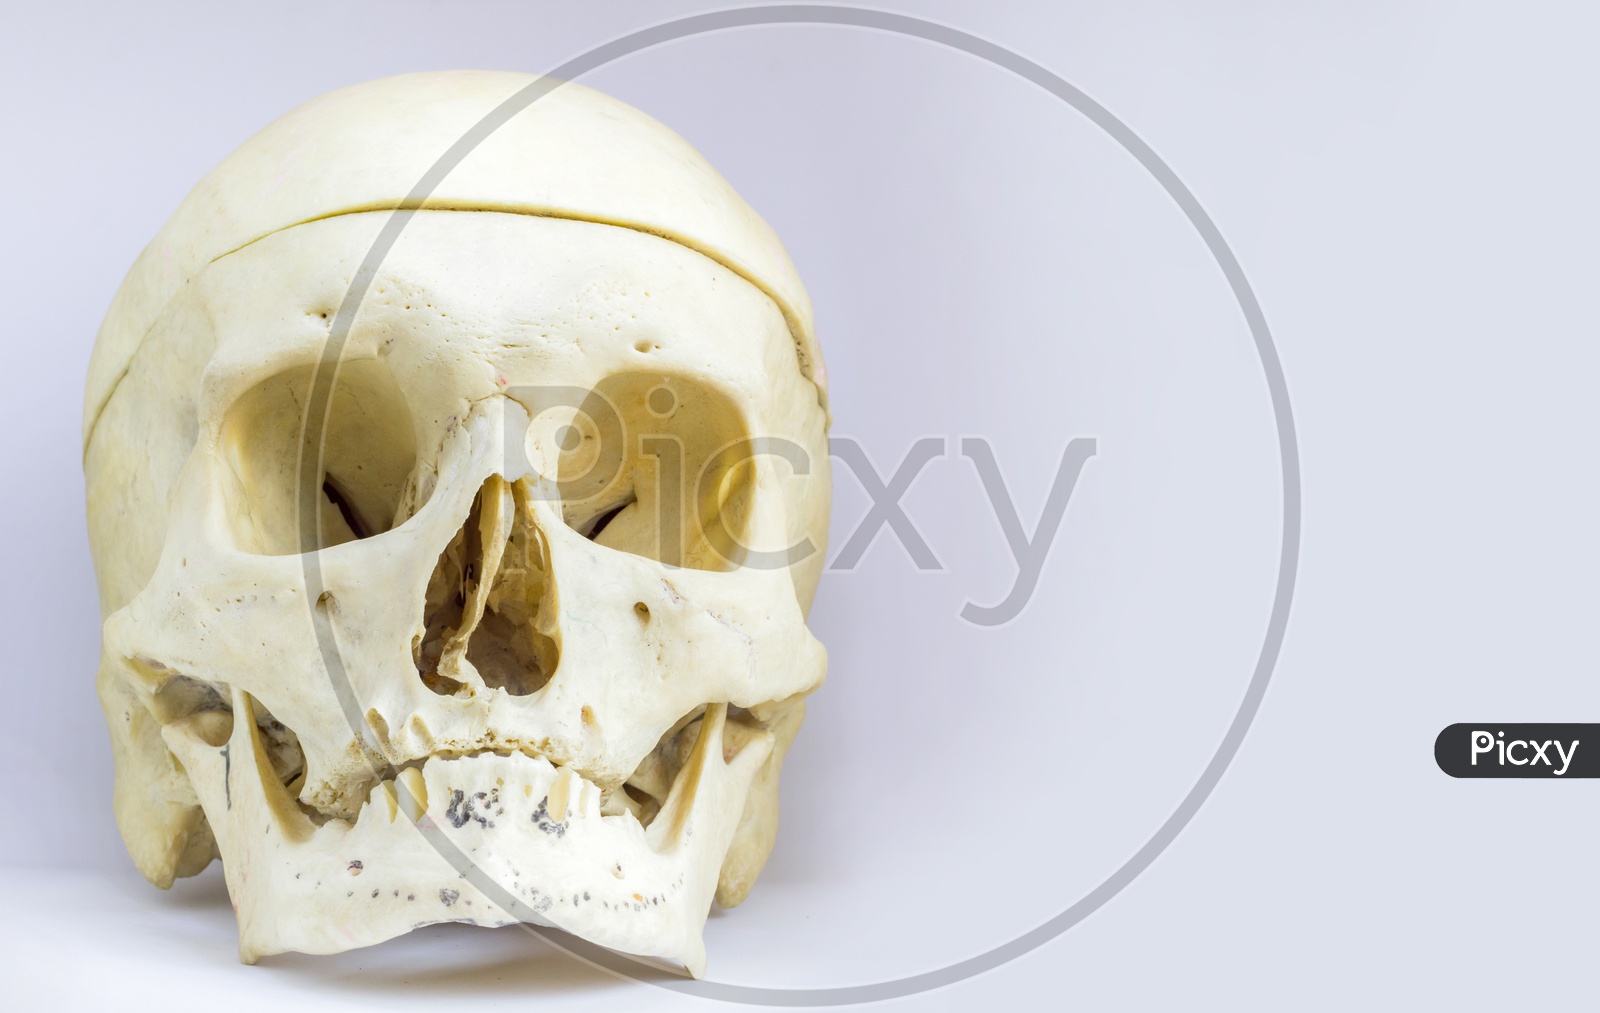 Front Anatomical View Of Human Skull Bone With Mandible And The Vault Of The Skull In Isolated White Background With Space For Text